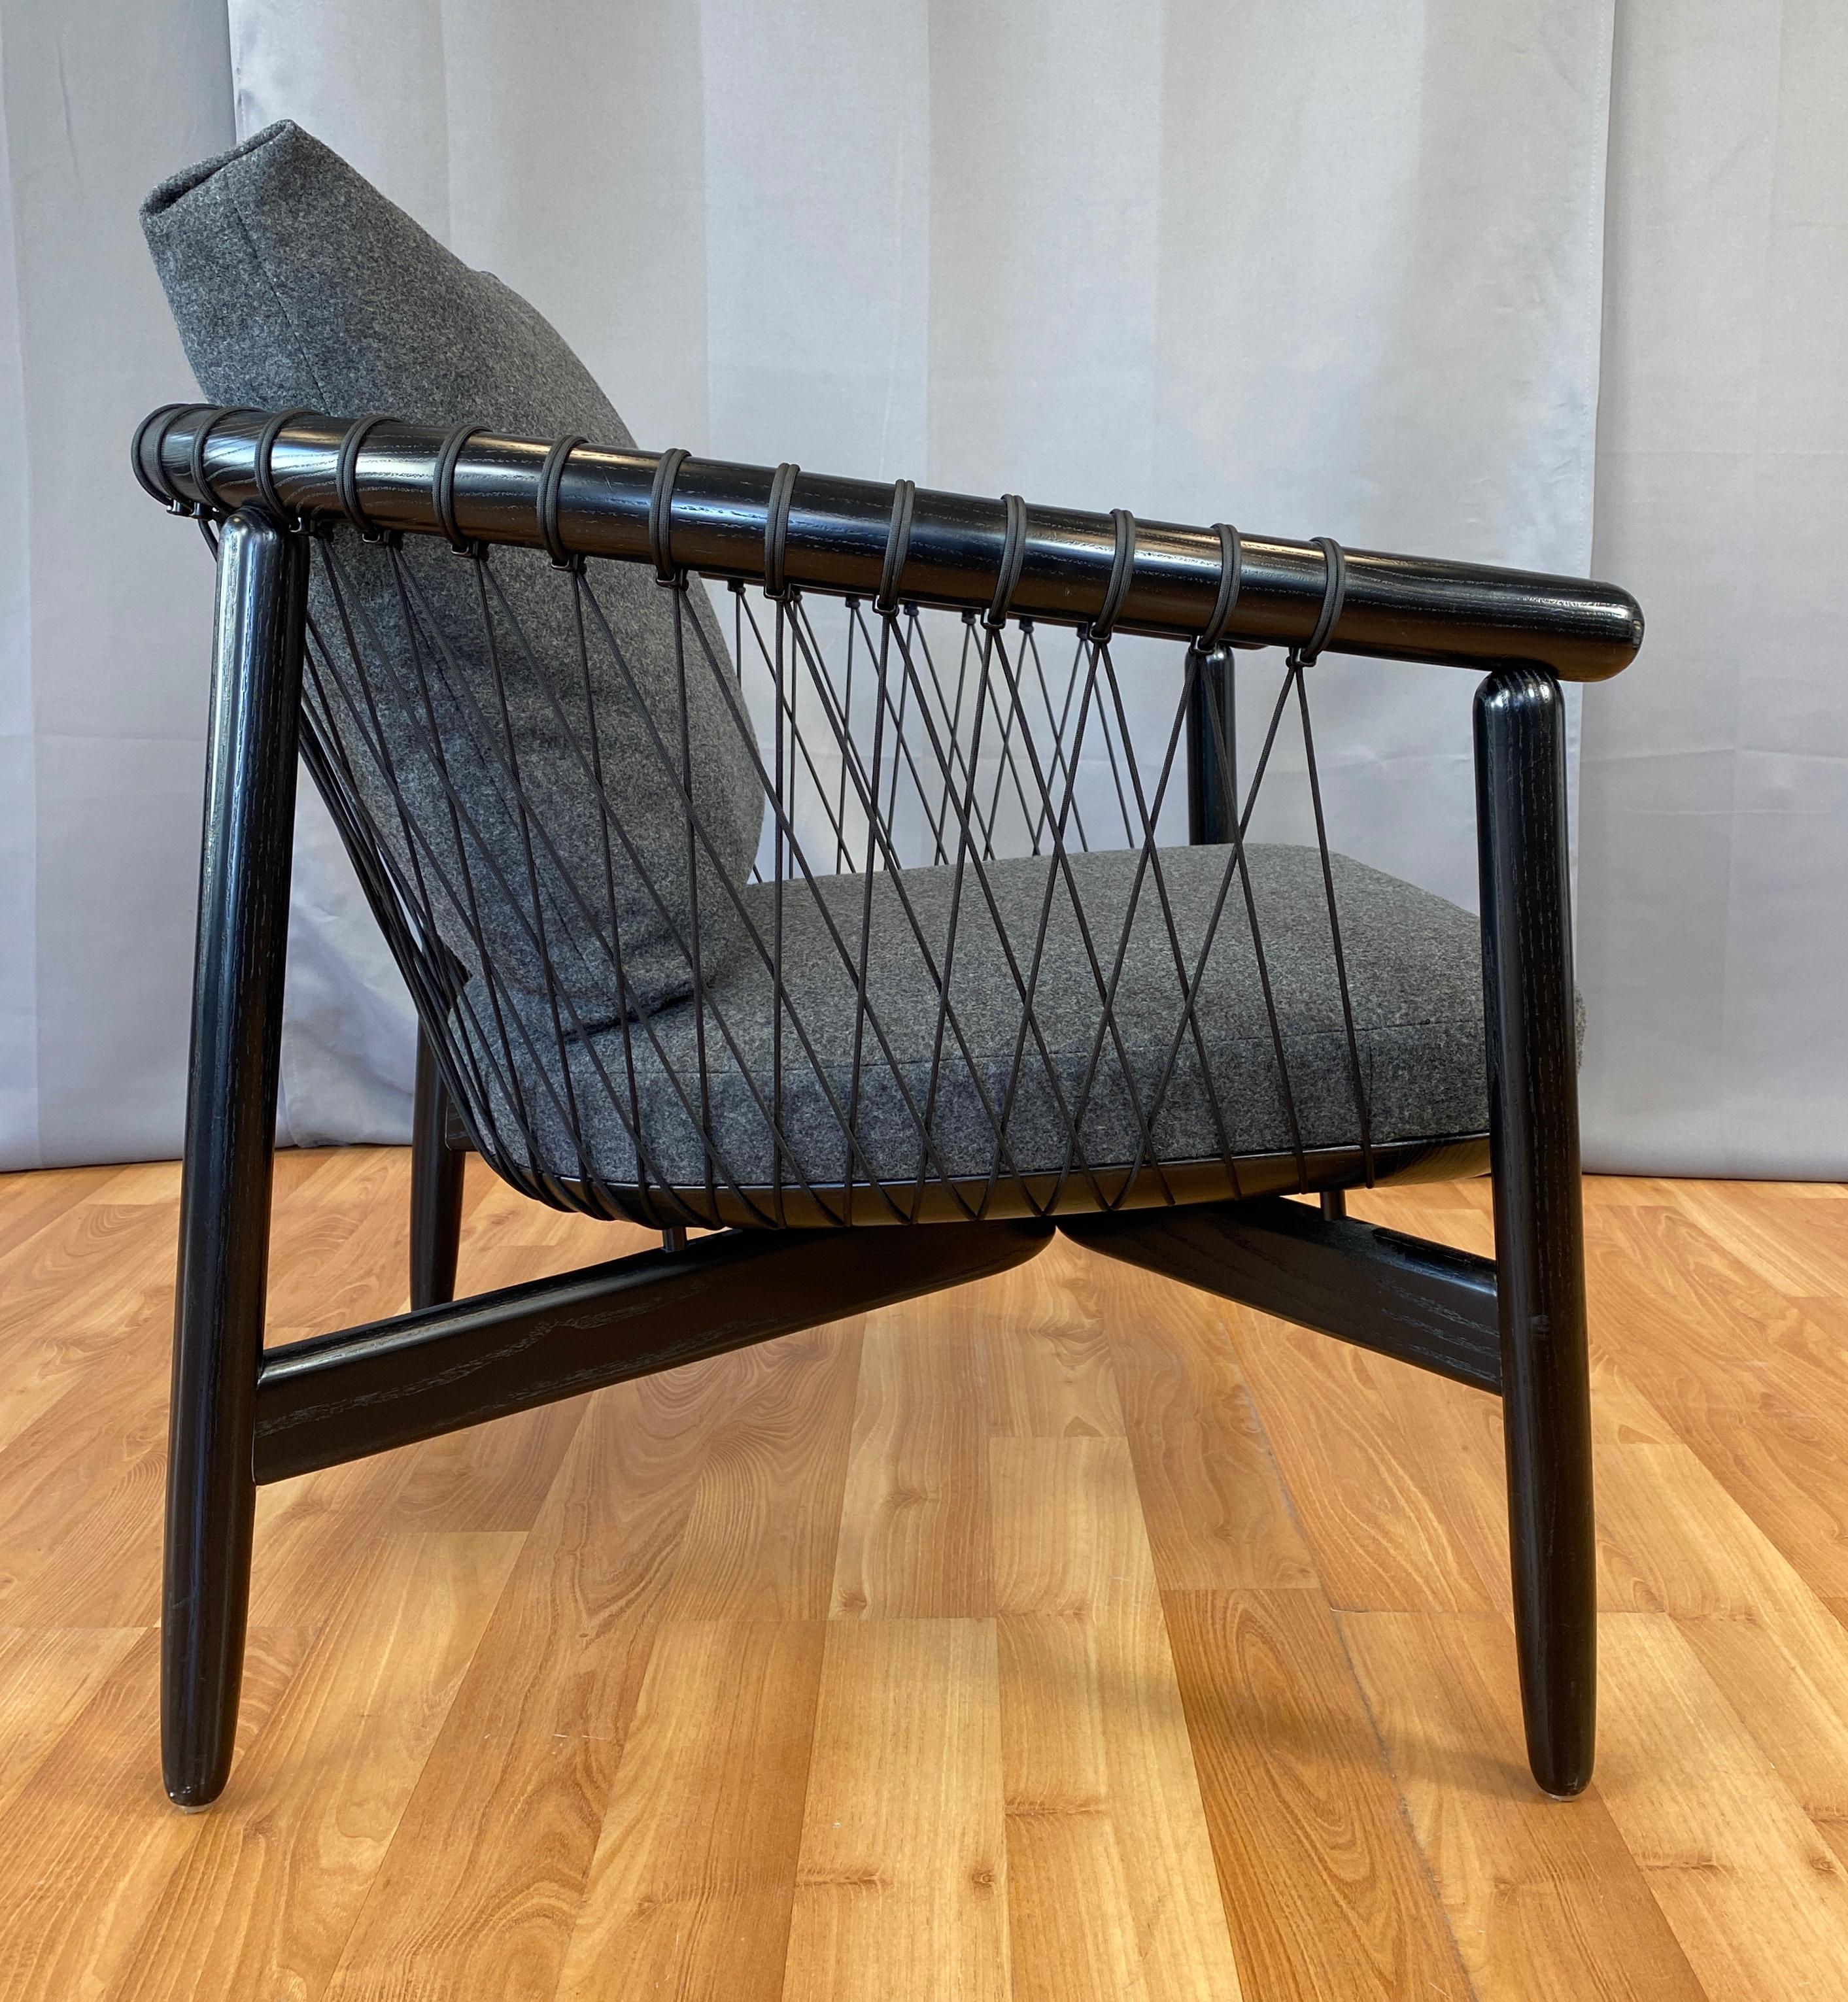 Modern Crosshatch Chair Designed by Eoos for Geiger from Herman Miller